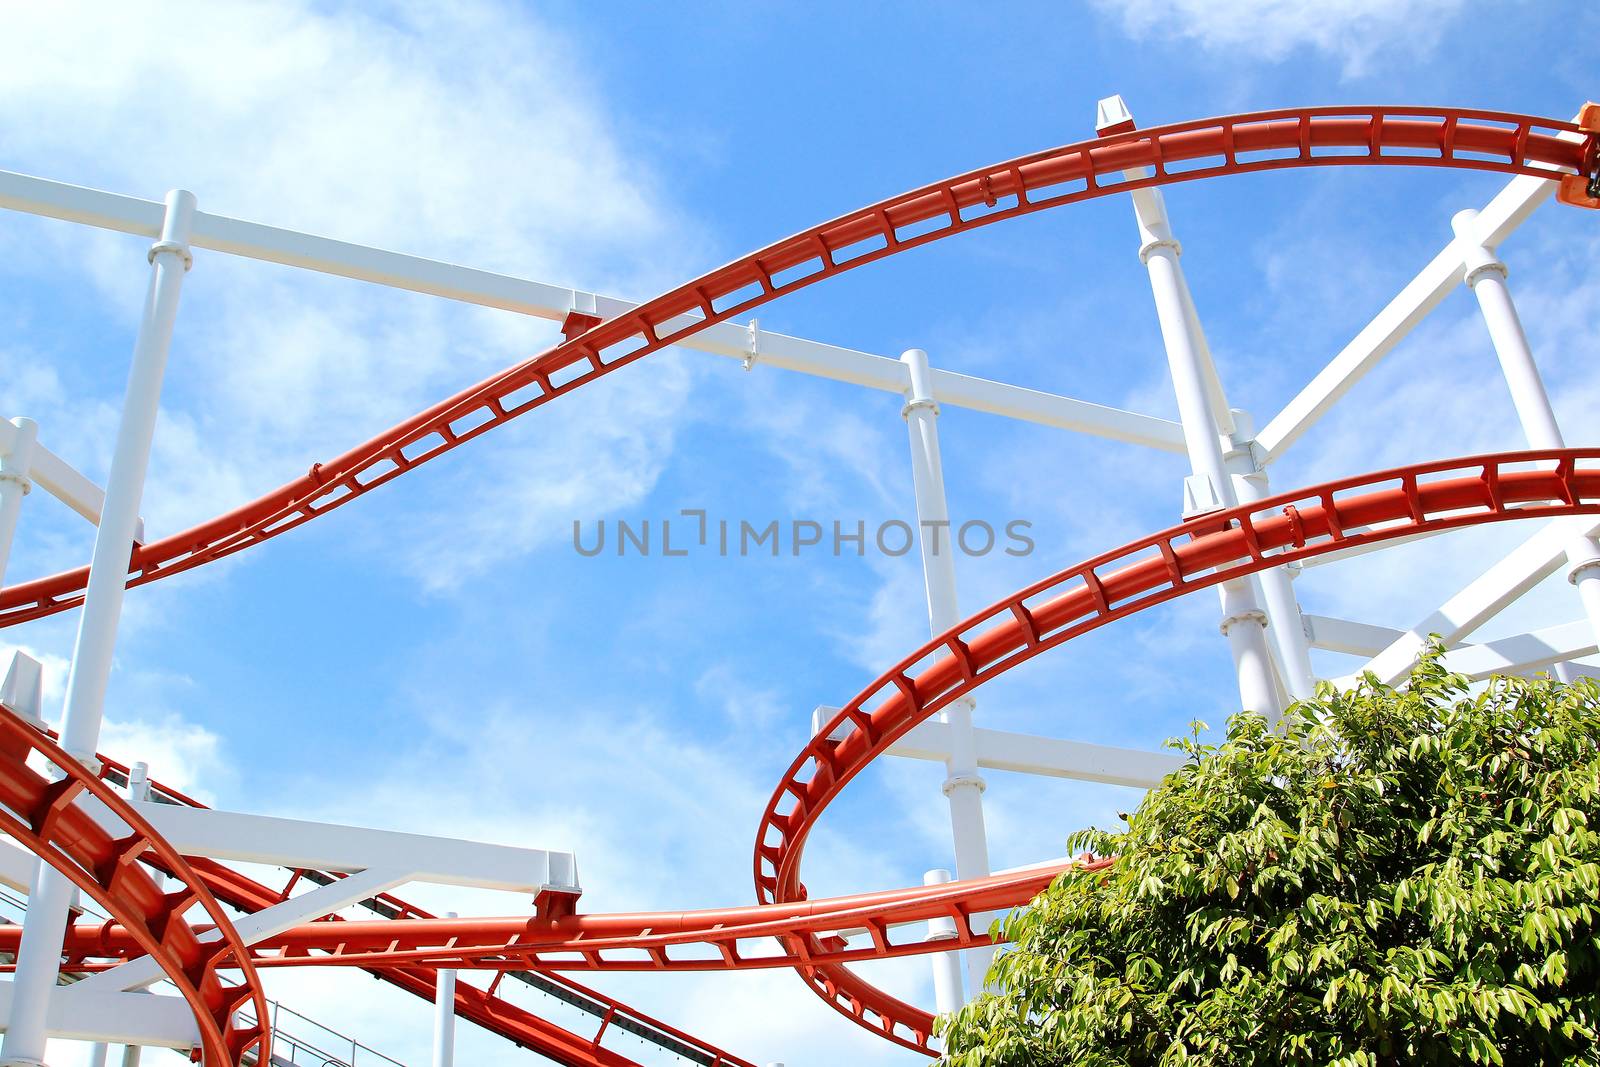 Segment of roller coaster by foto76